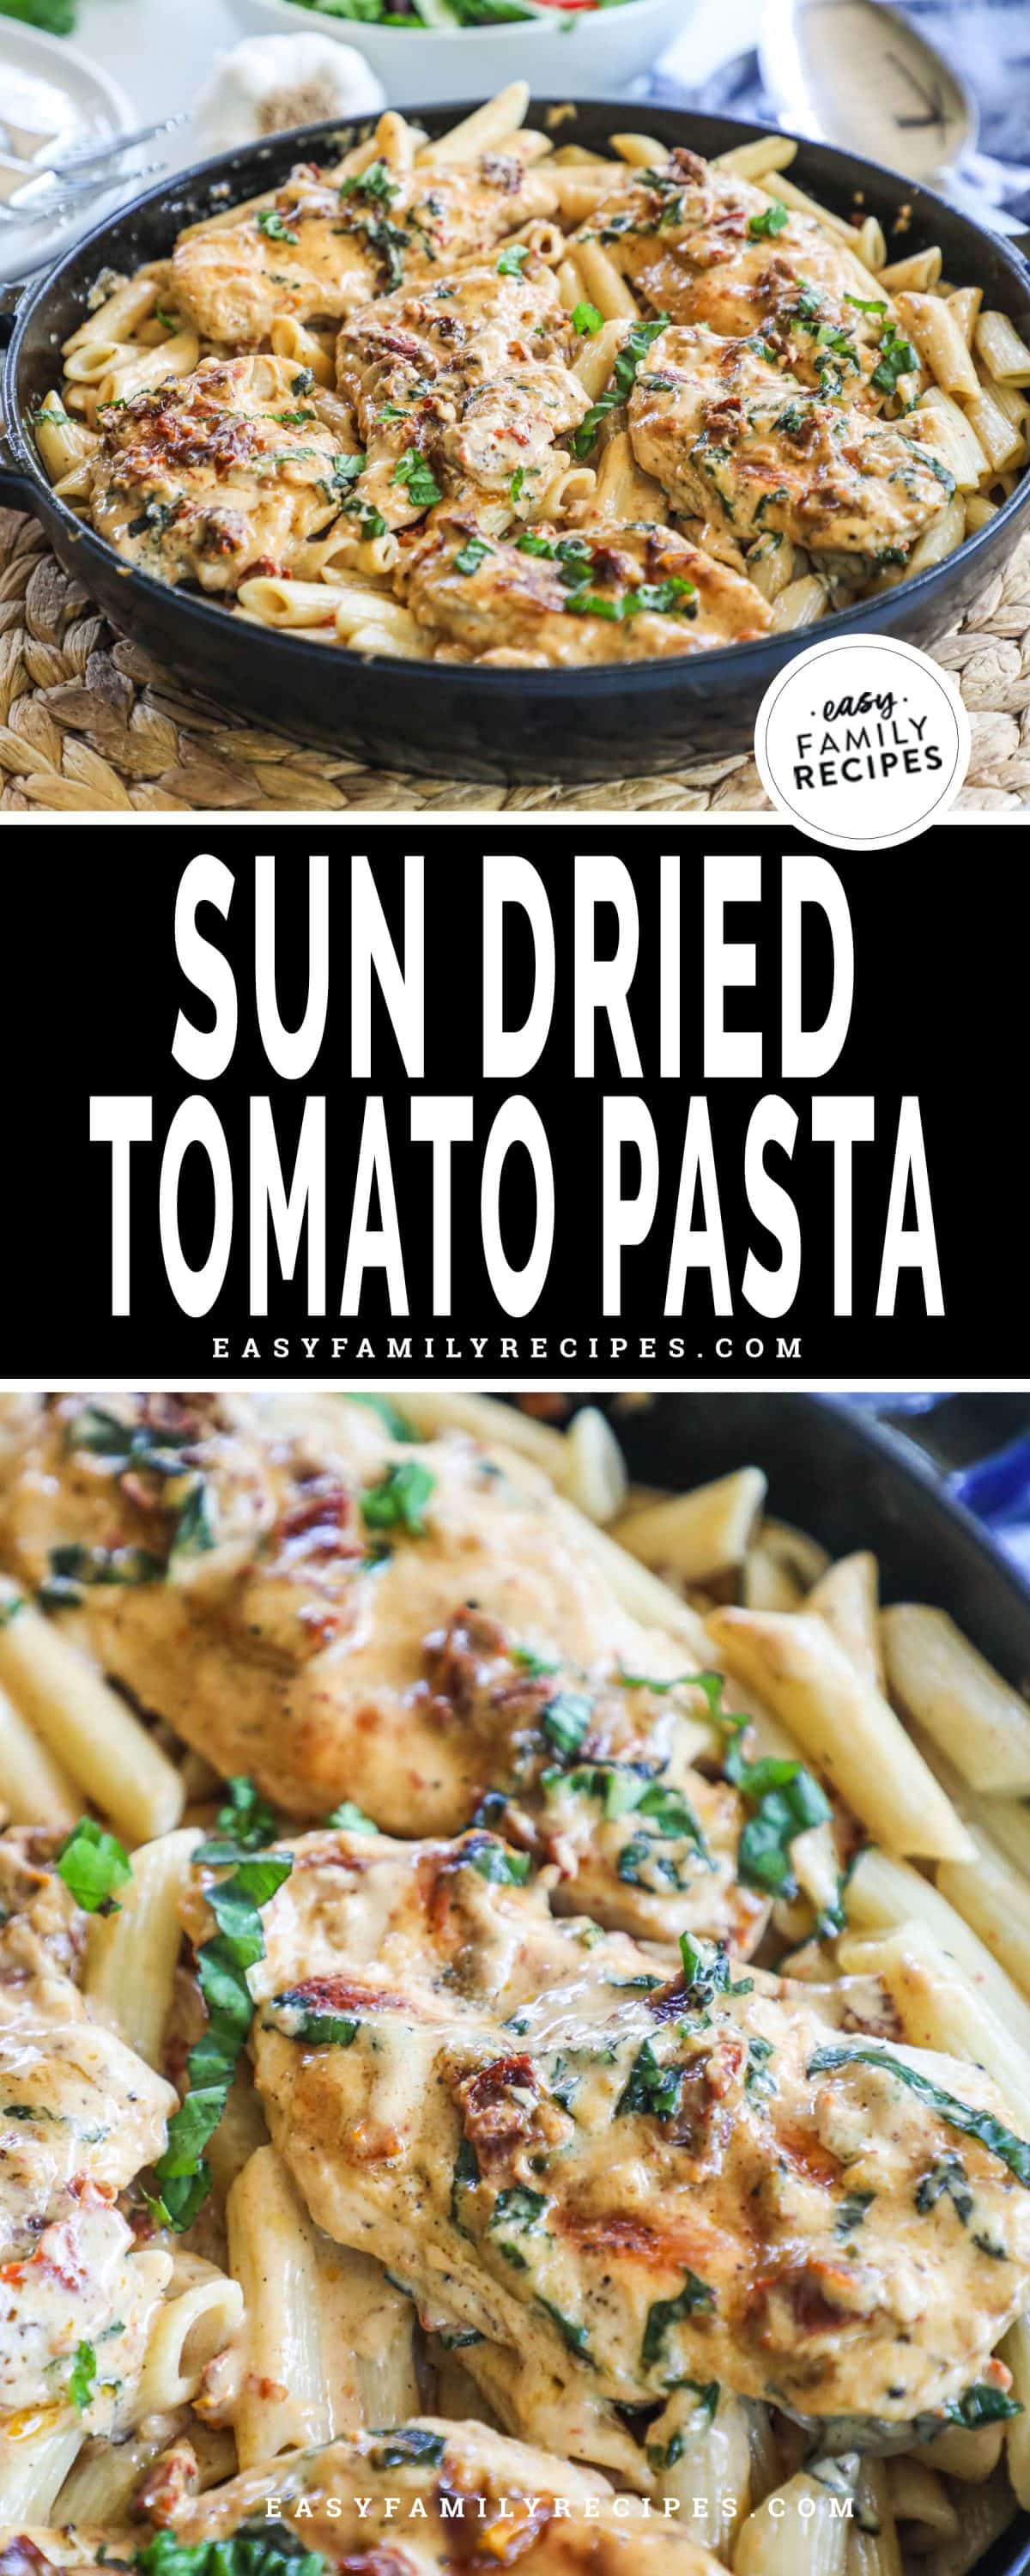 Sun dried tomato pasta in a skillet with cream sauce and on a plate for serving.